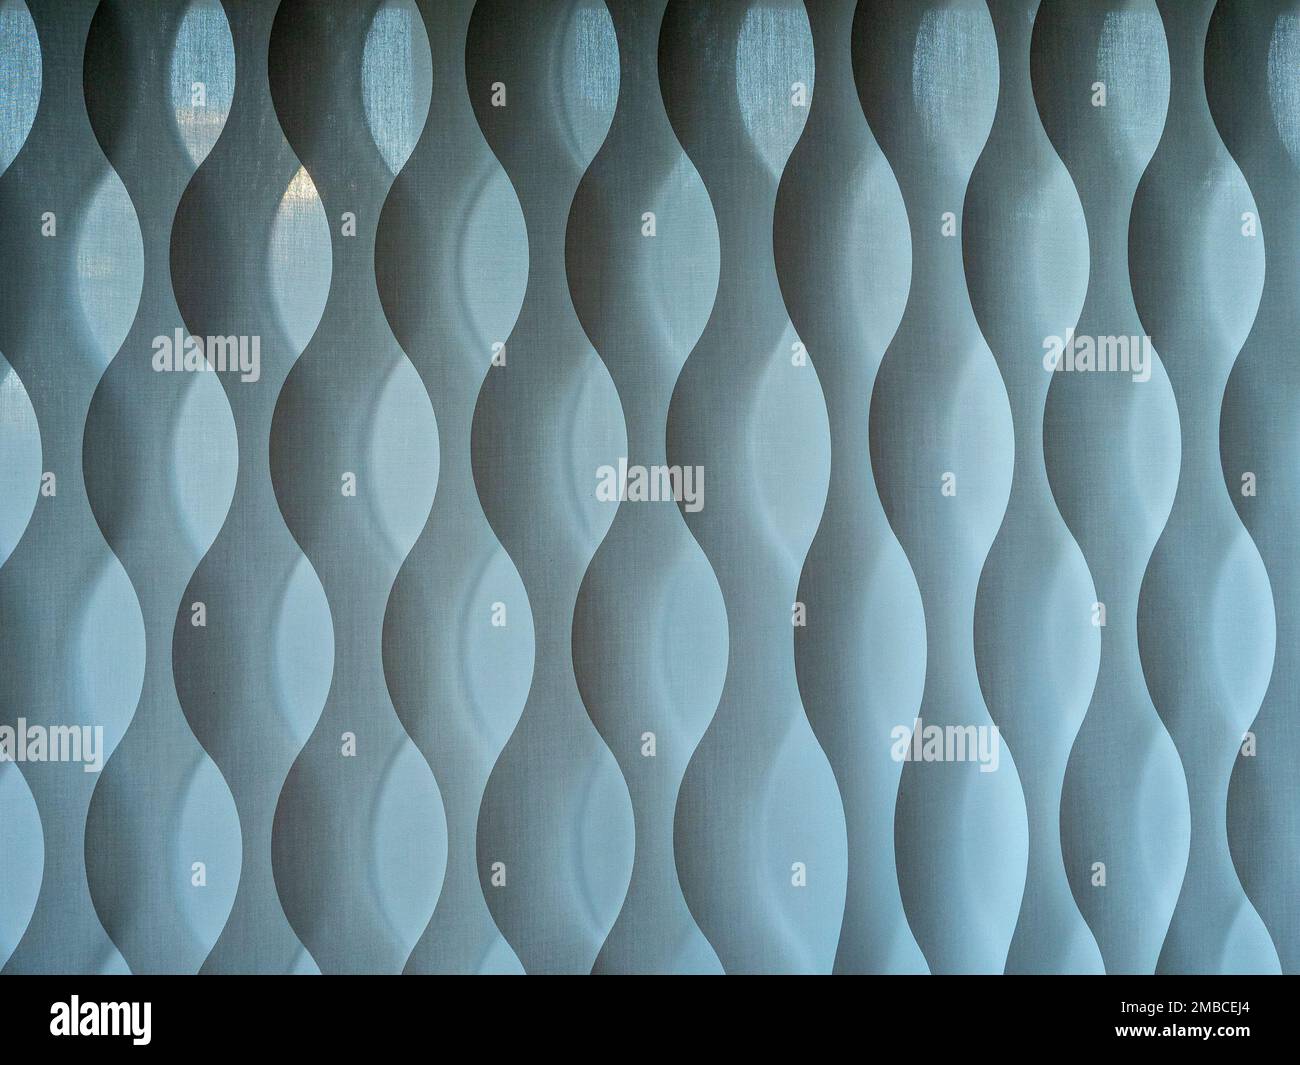 Curtain with modern wave design Stock Photo